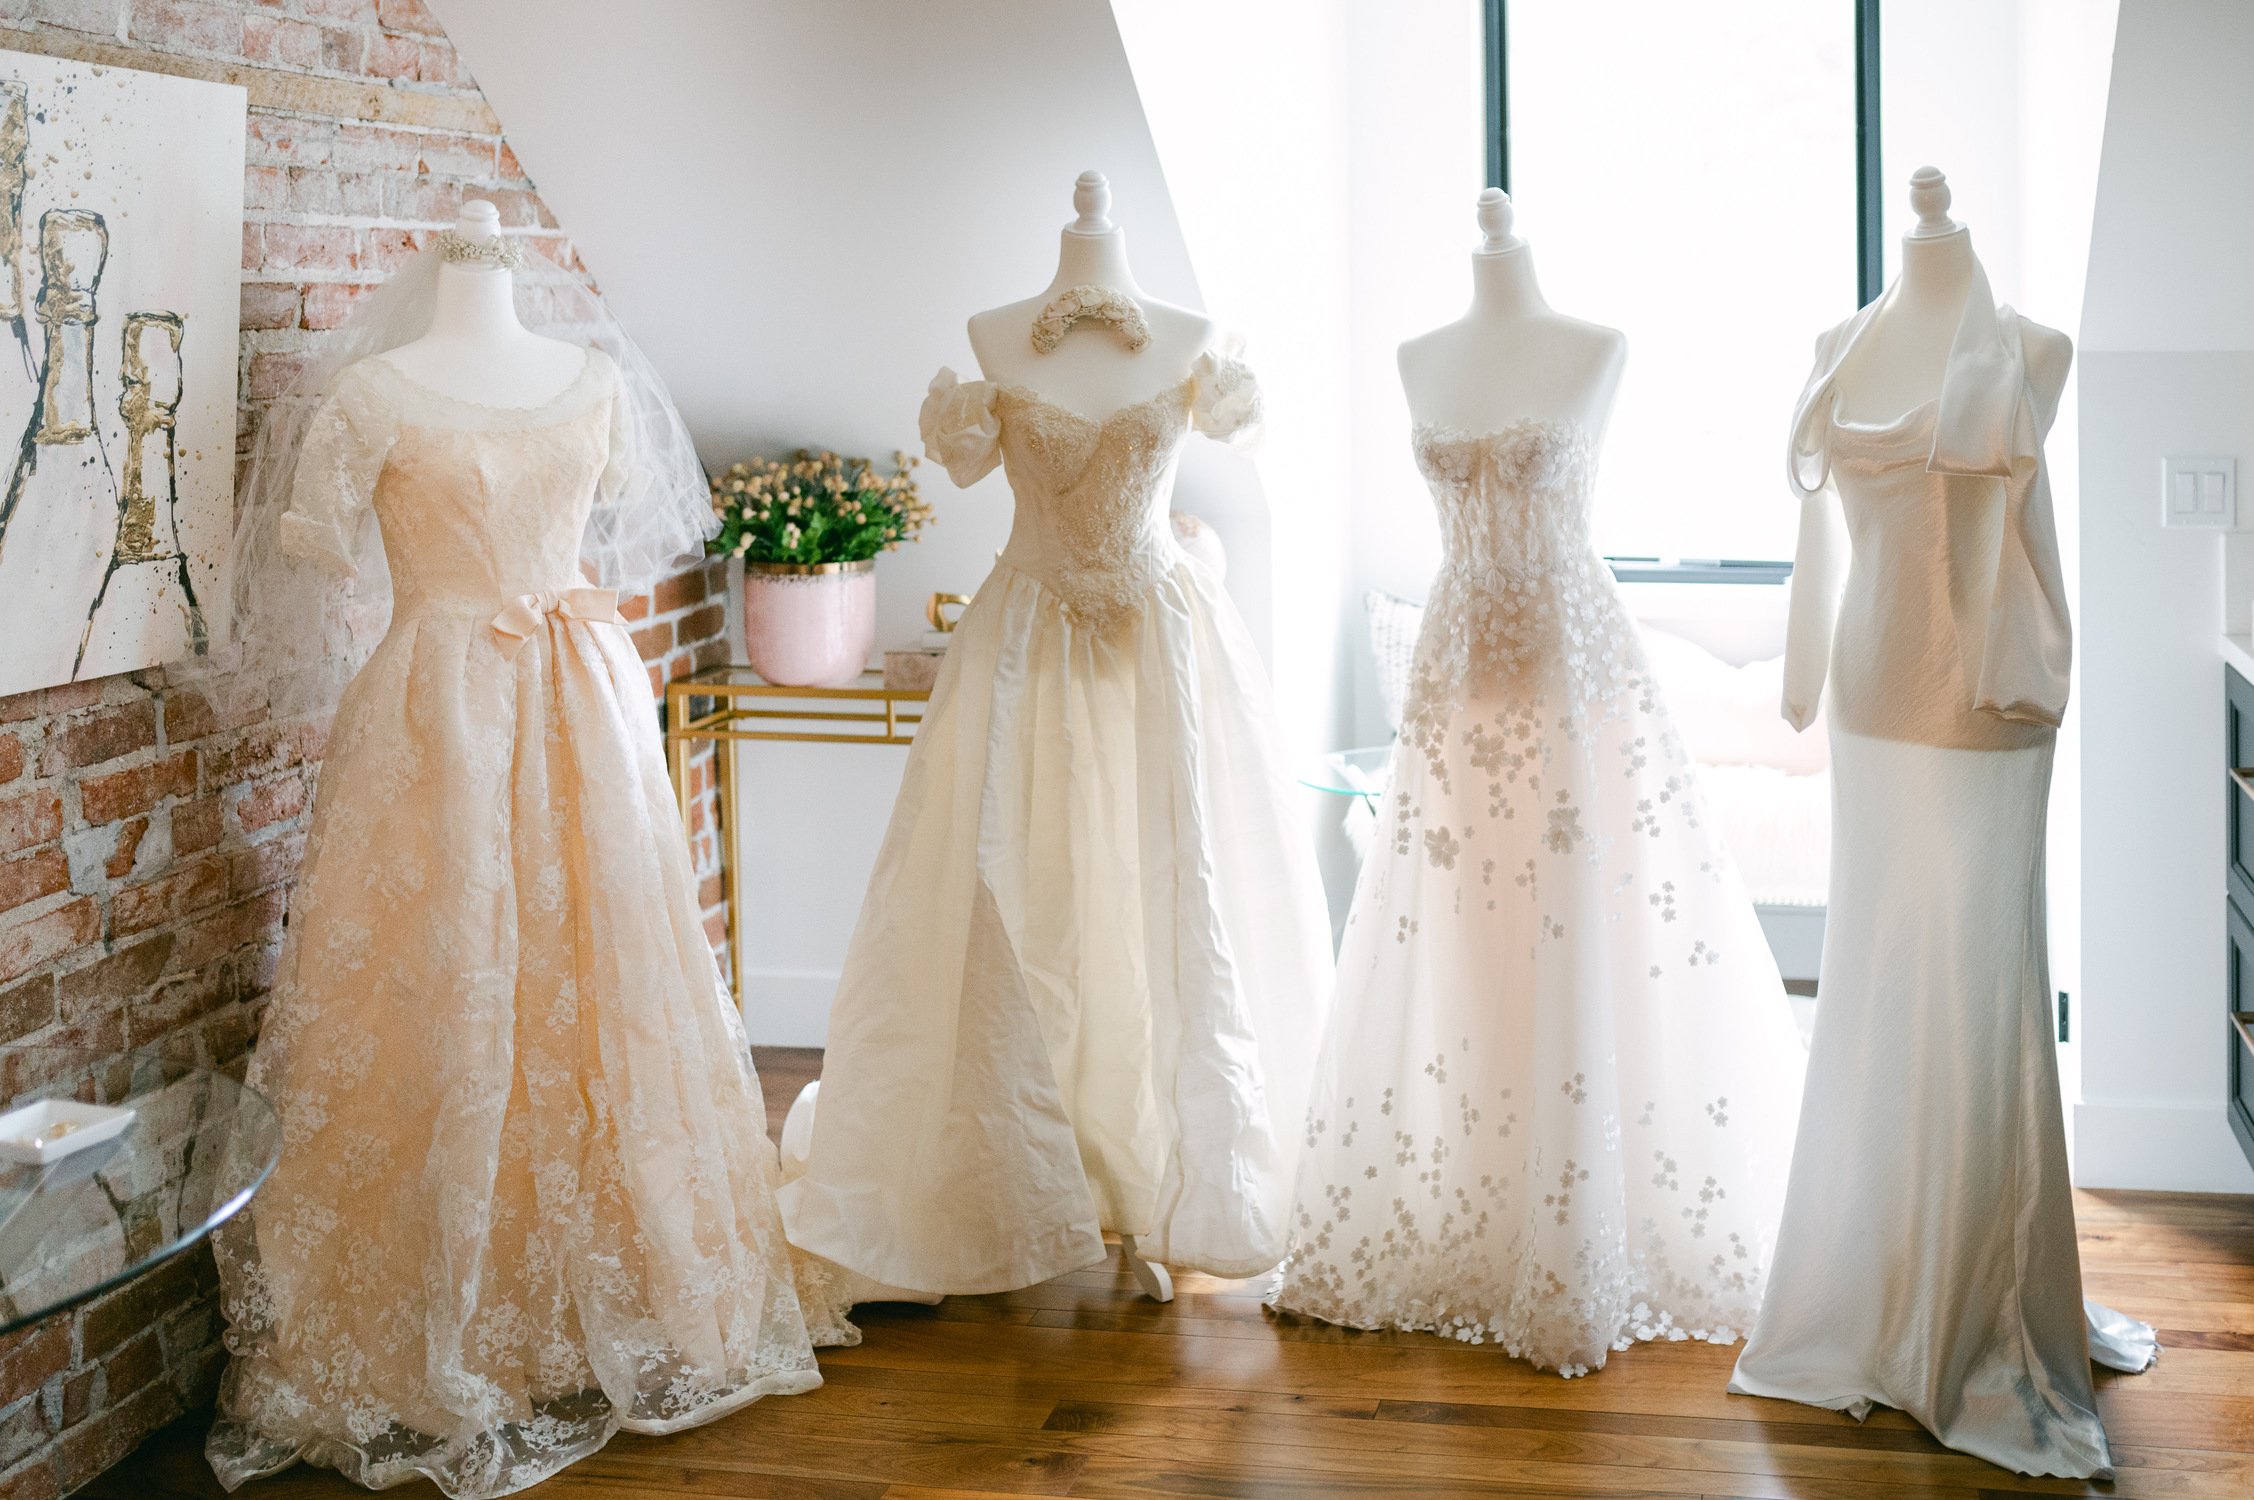 Elm Estate Wedding photos, photo of the wedding dresses from different generations